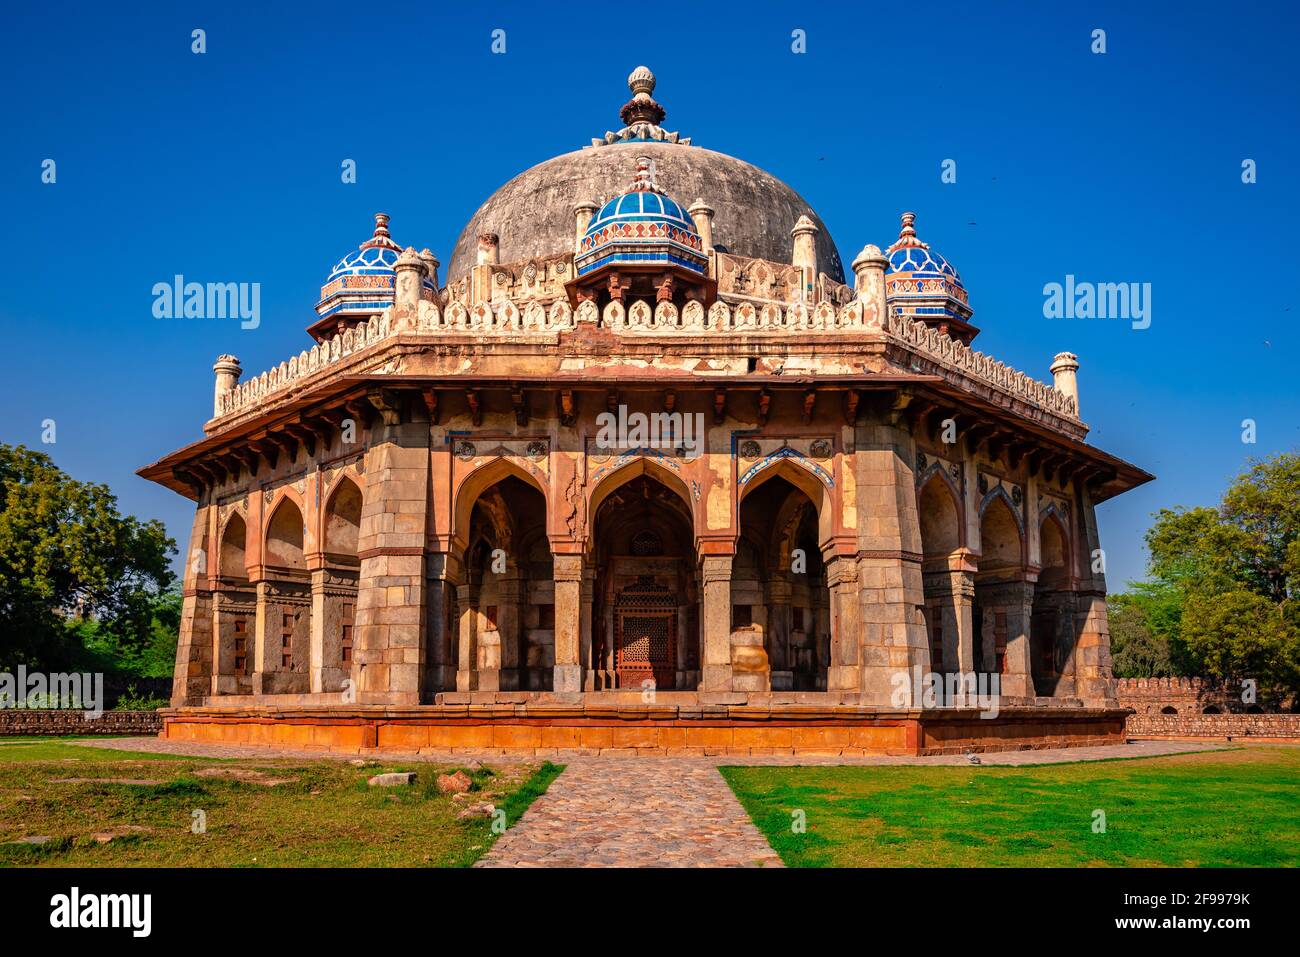 Tomb Complex Of Isa Khan Niyazi An Afghan Noble In Sher Shah Suri S Court Of The Suri Dynasty The Octagonal Tomb Is Similar To Architectural Style O Stock Photo Alamy